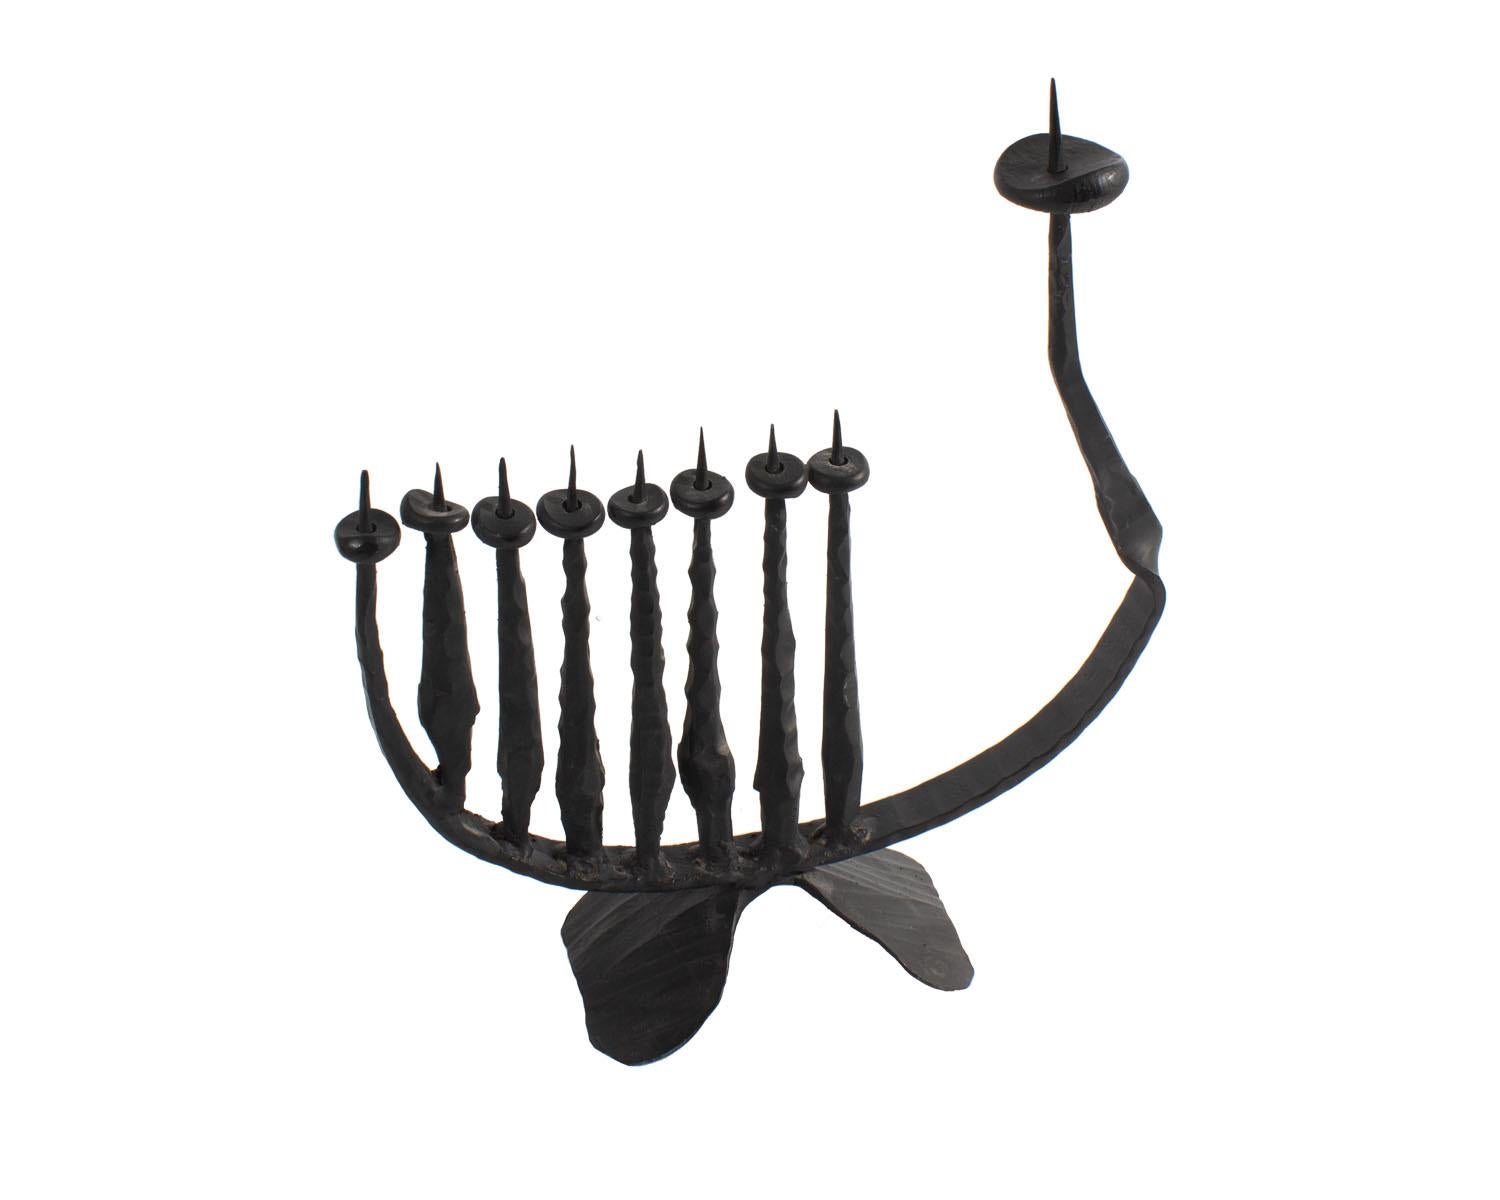 A Brutalist hand-forged iron hanukkiah by Turkish-Israeli sculptor and painter David Palombo (1920-1966). This iron Hanukkah menorah features an asymmetrical arrangement of eight short candle holders and a single taller shamash holder to one side.